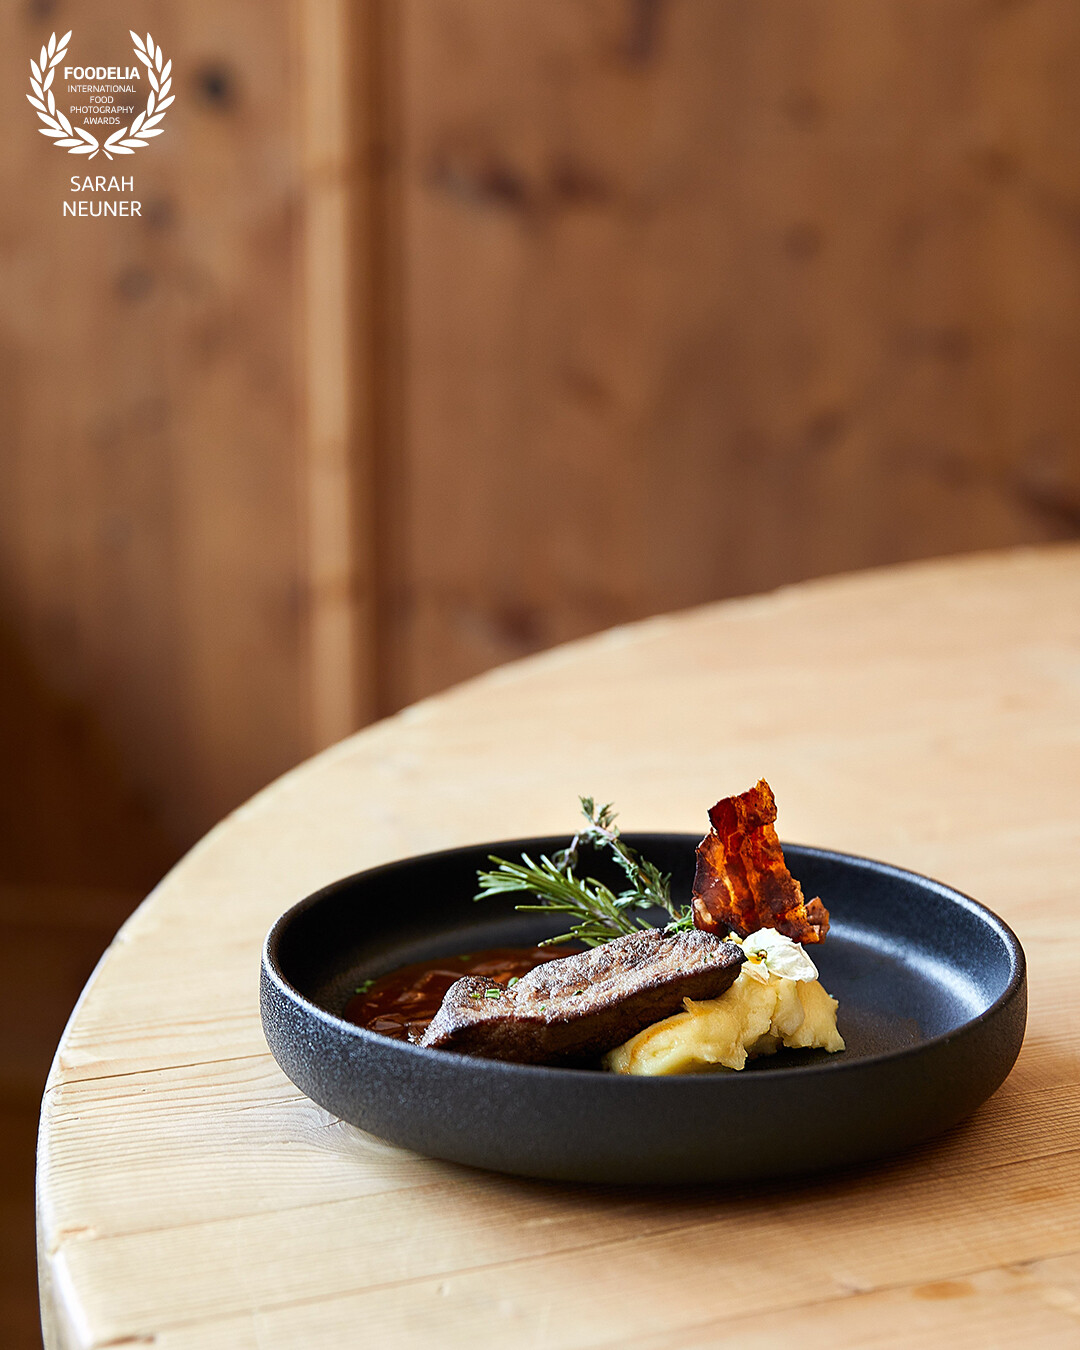 Main dish from the talented kitchen team at the Bio-Hotel Stanglwirt in Kitzbühel, Tyrol. Photographed during a restaurant shoot to highlight the culinary dishes on offer at the hotel.